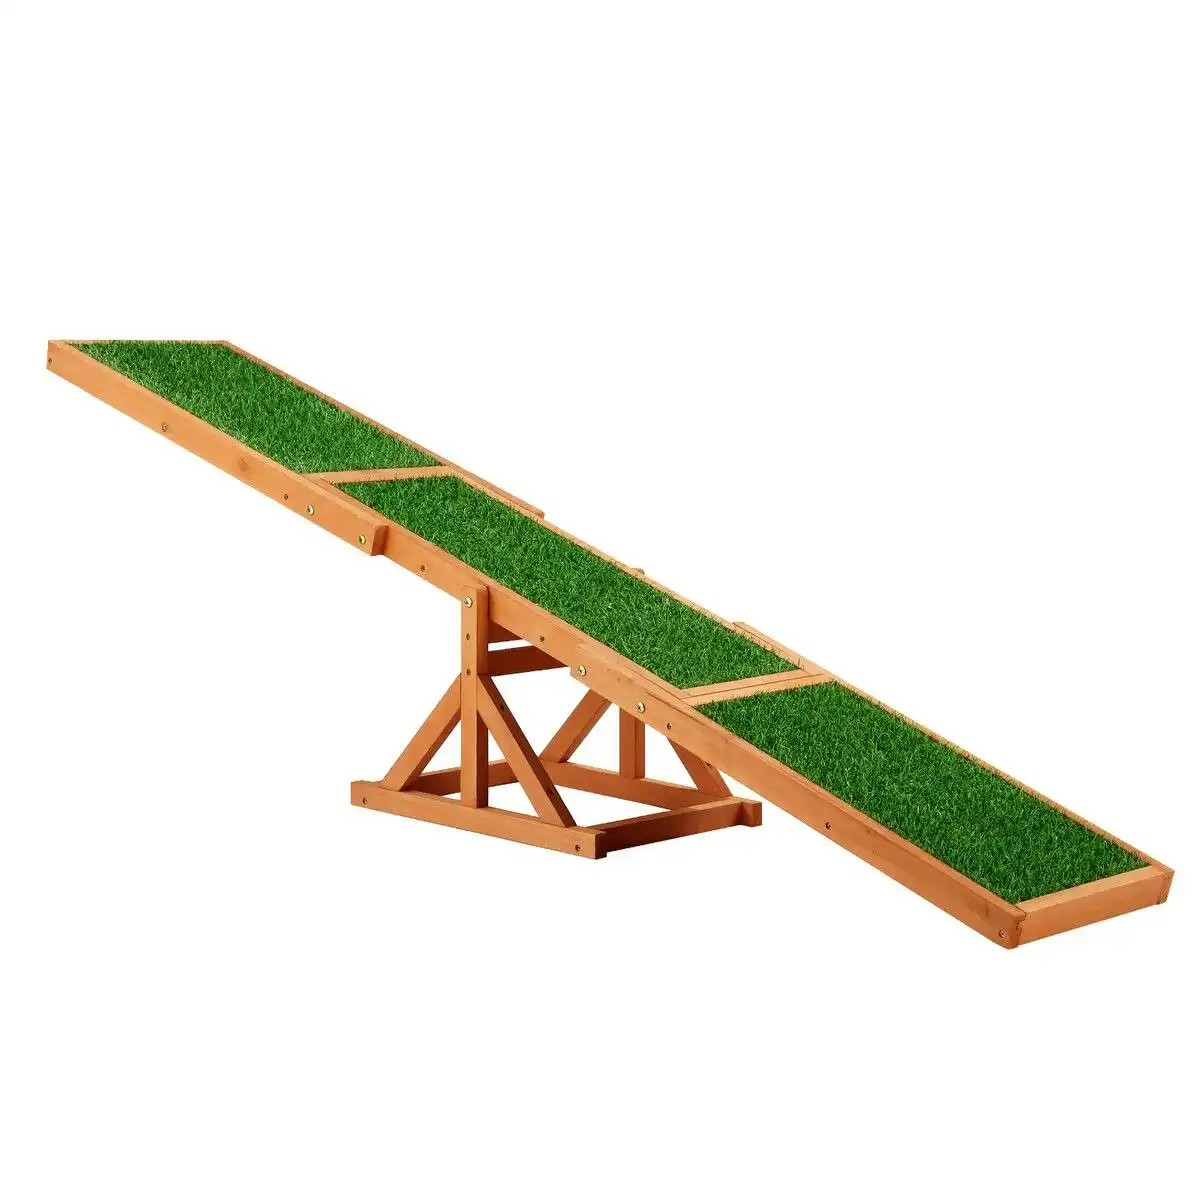 Pet Scene Petscene Pet Seesaw Dog Obedience Training Puppy Sports Agility Outdoor Play Exercise Equipment Teeter Totter Wooden Artificial Grass